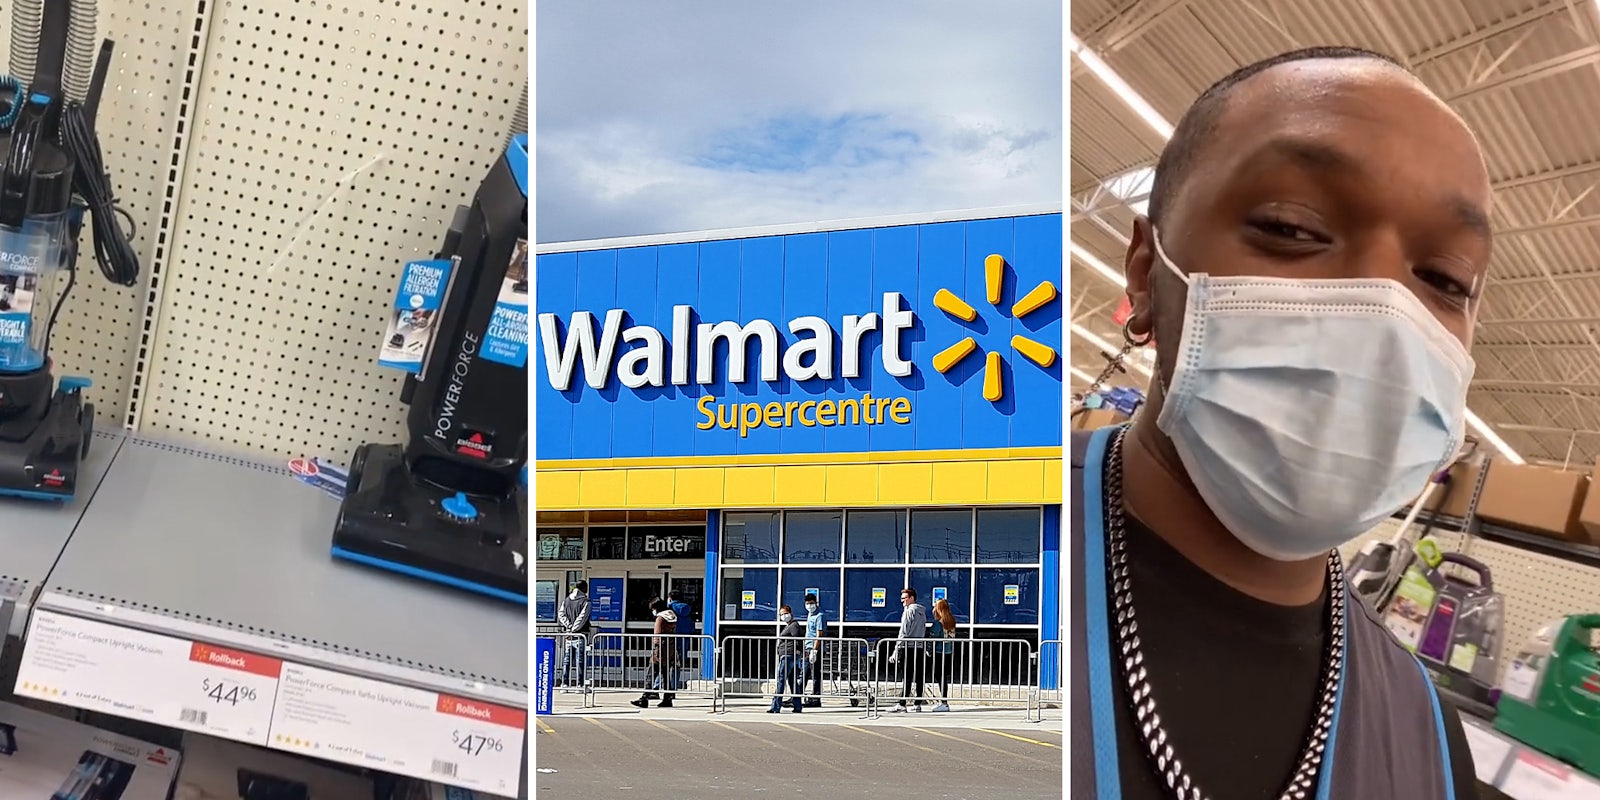 Walmart customer tried to buy display vacuum cleaner after getting told no